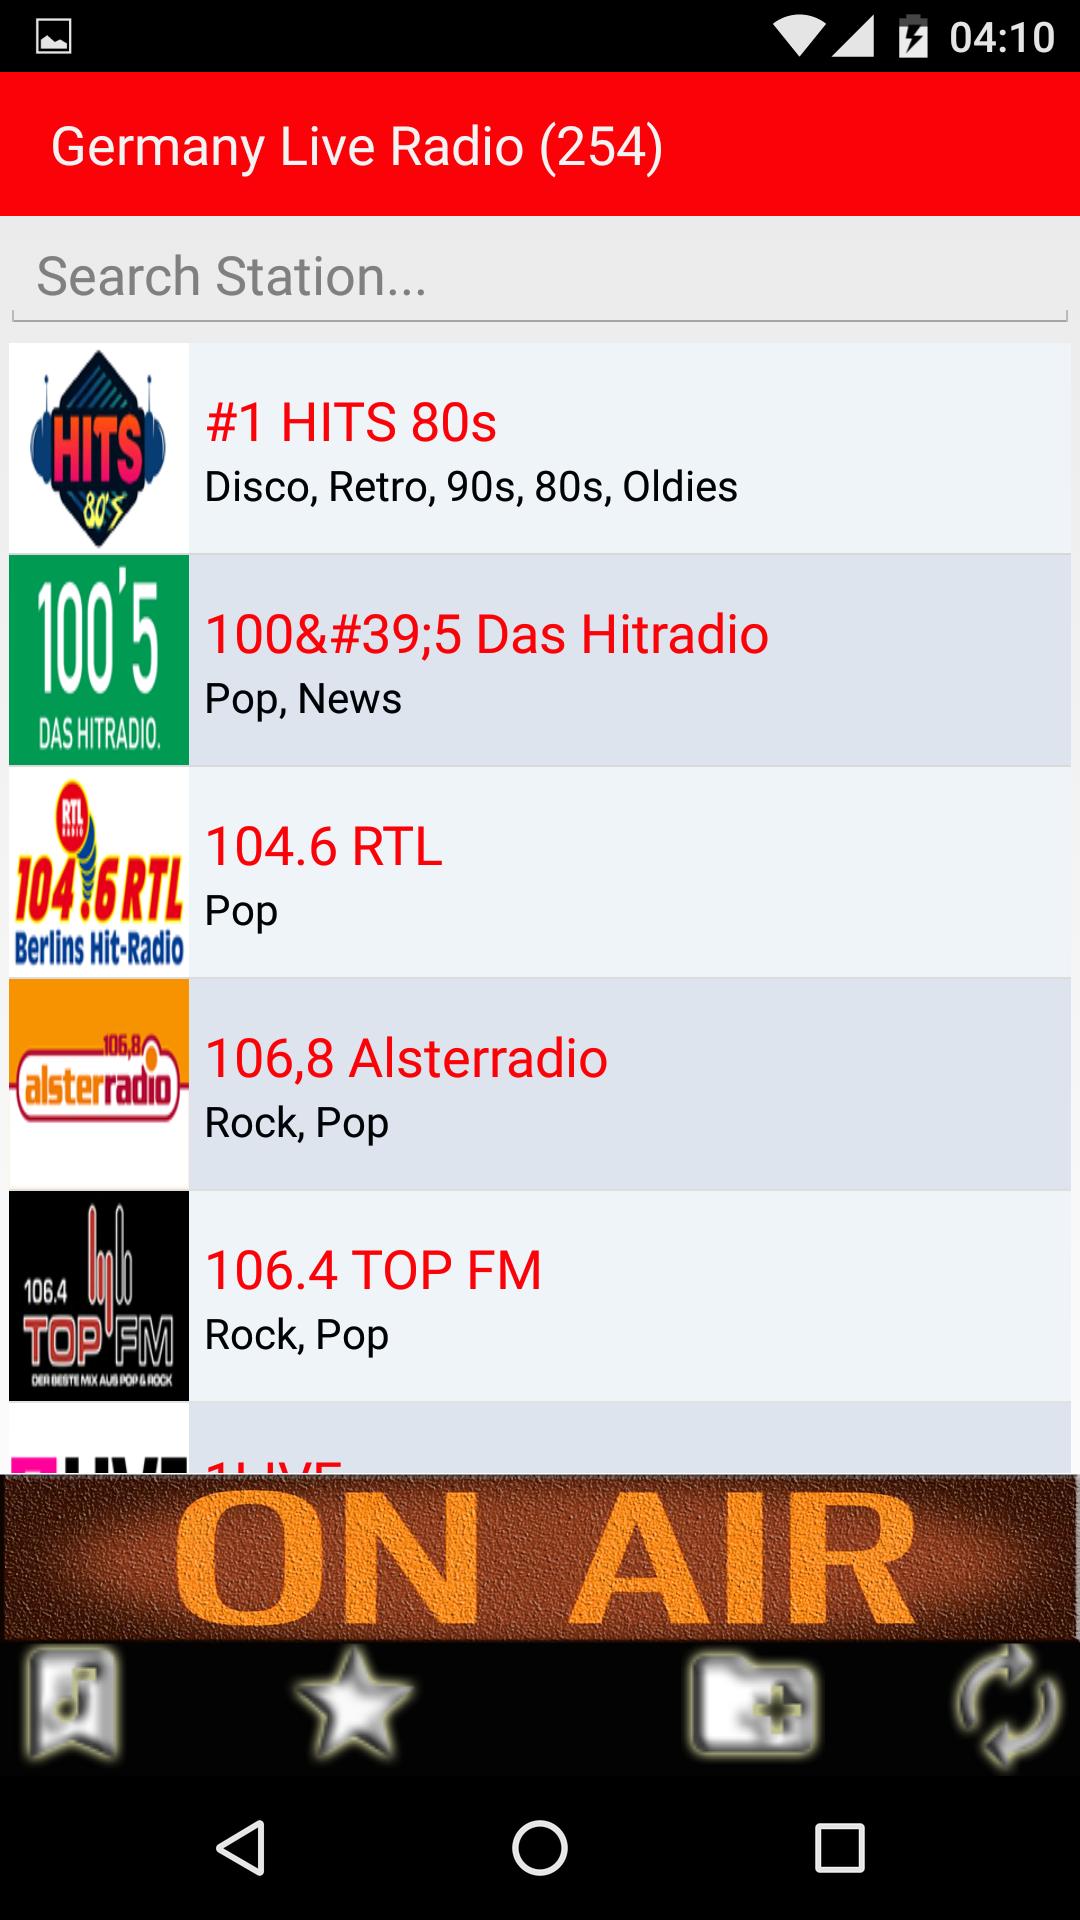 Online German Radio hits Music and Talk for Android - APK Download